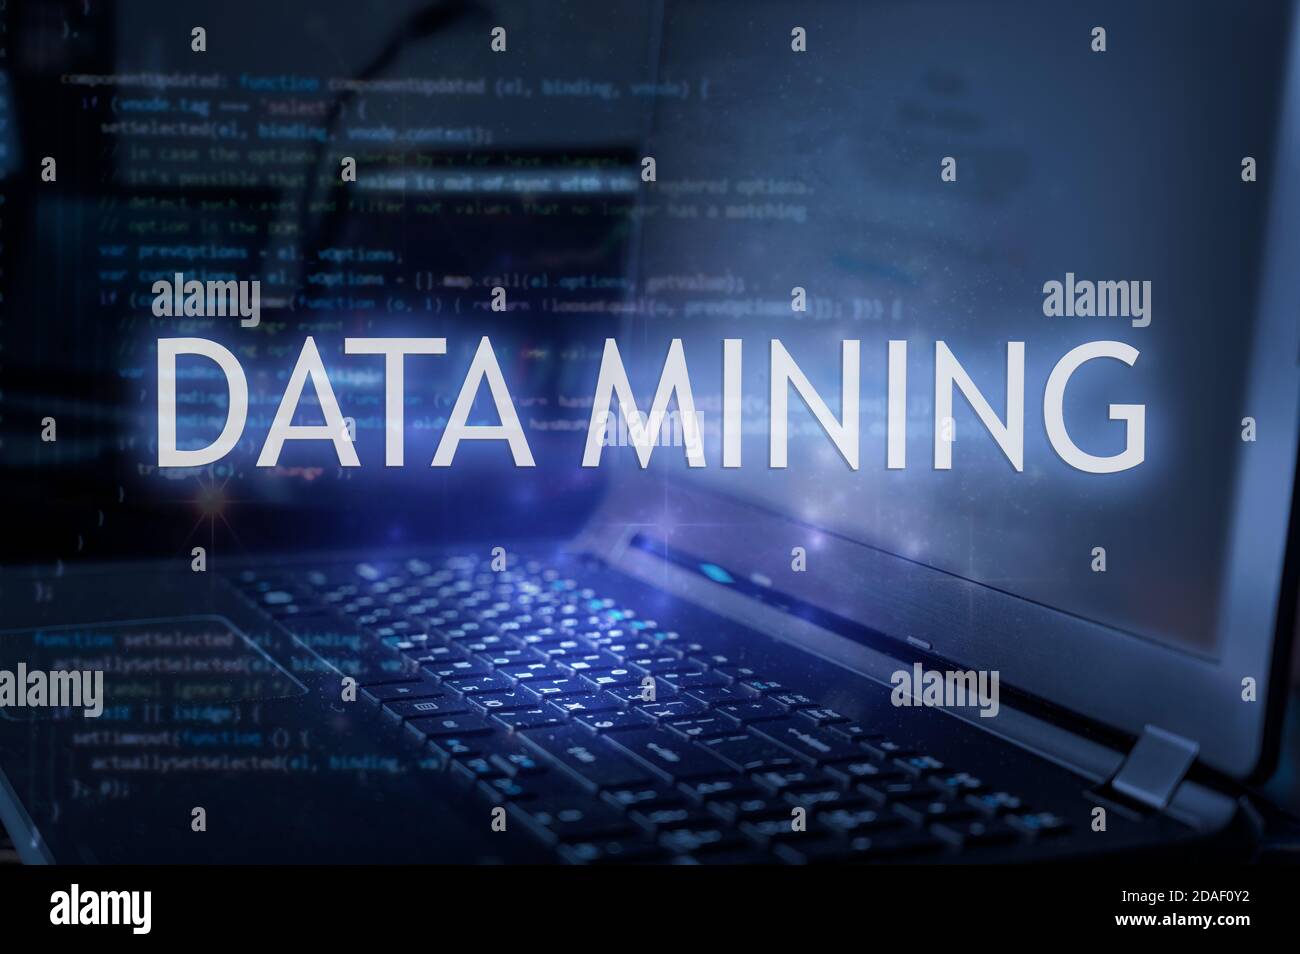 Data mining inscription against laptop and code background. Stock Photo